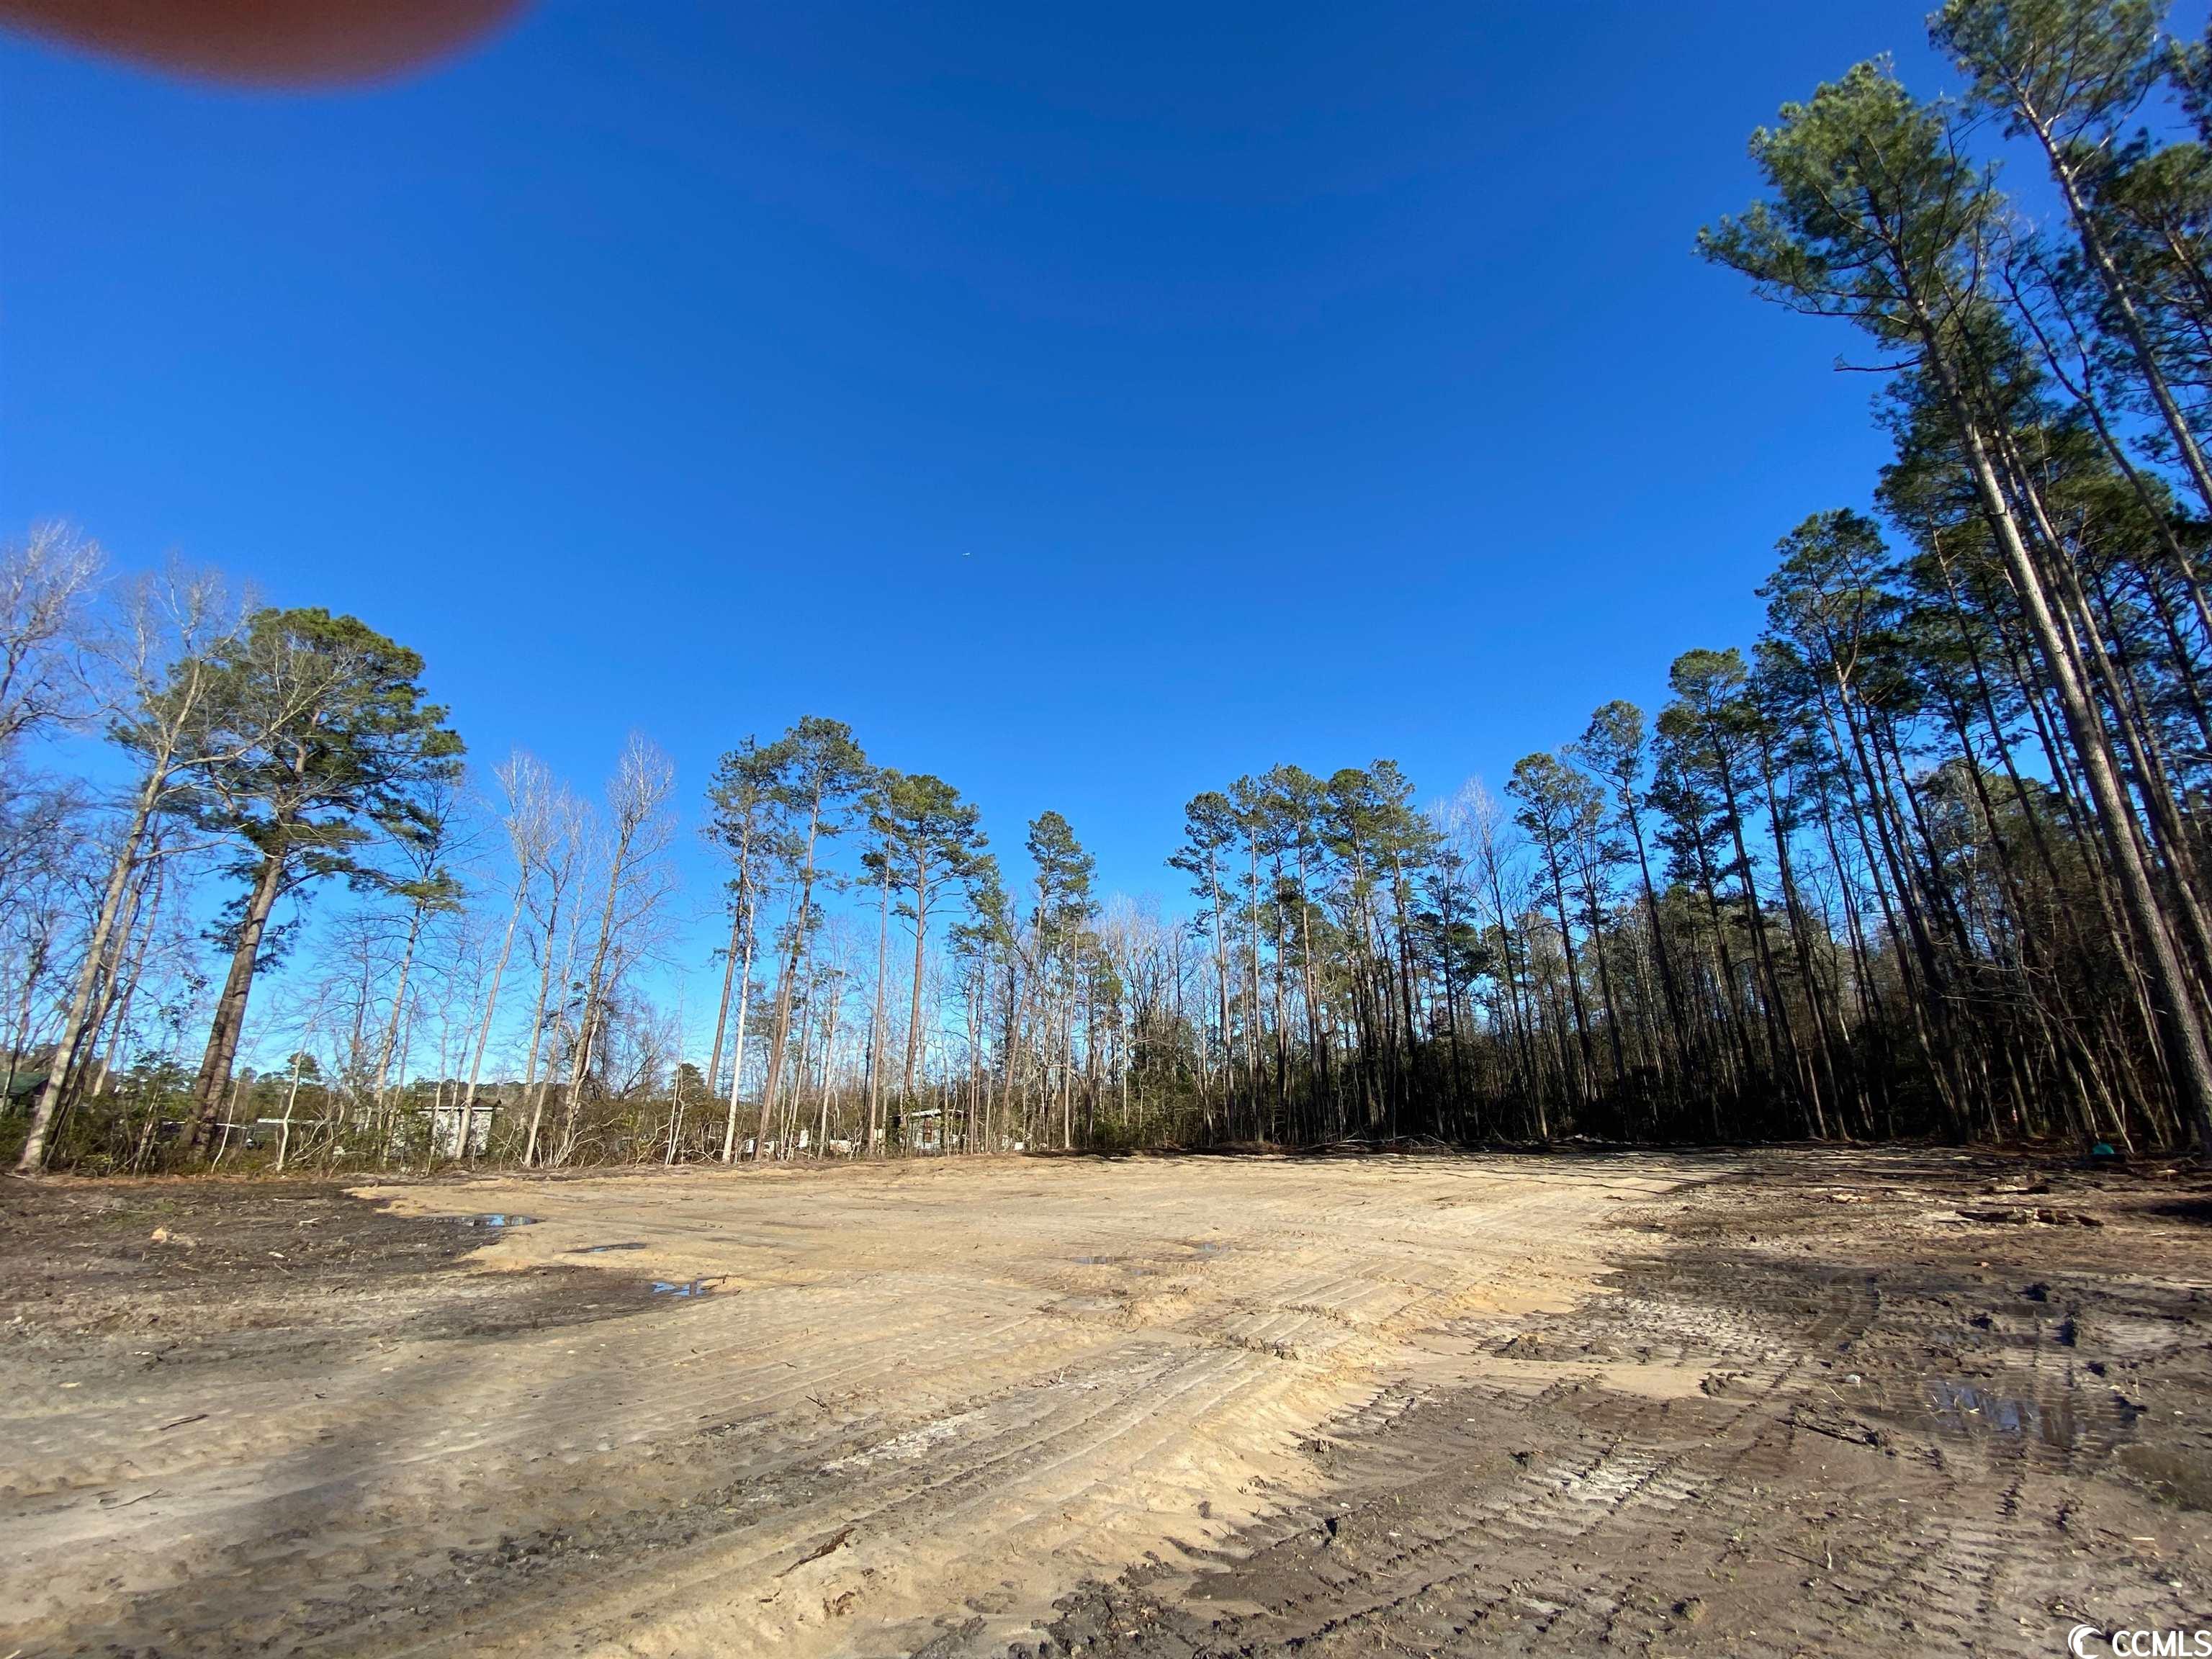 welcome home to this 1.47-acre lot less than 7 miles from conway. plenty of room for rv and boat parking. no hoa. buyer would agree to 1/3 upkeep of driveway. 1.47 acres includes .22 acres wetlands.